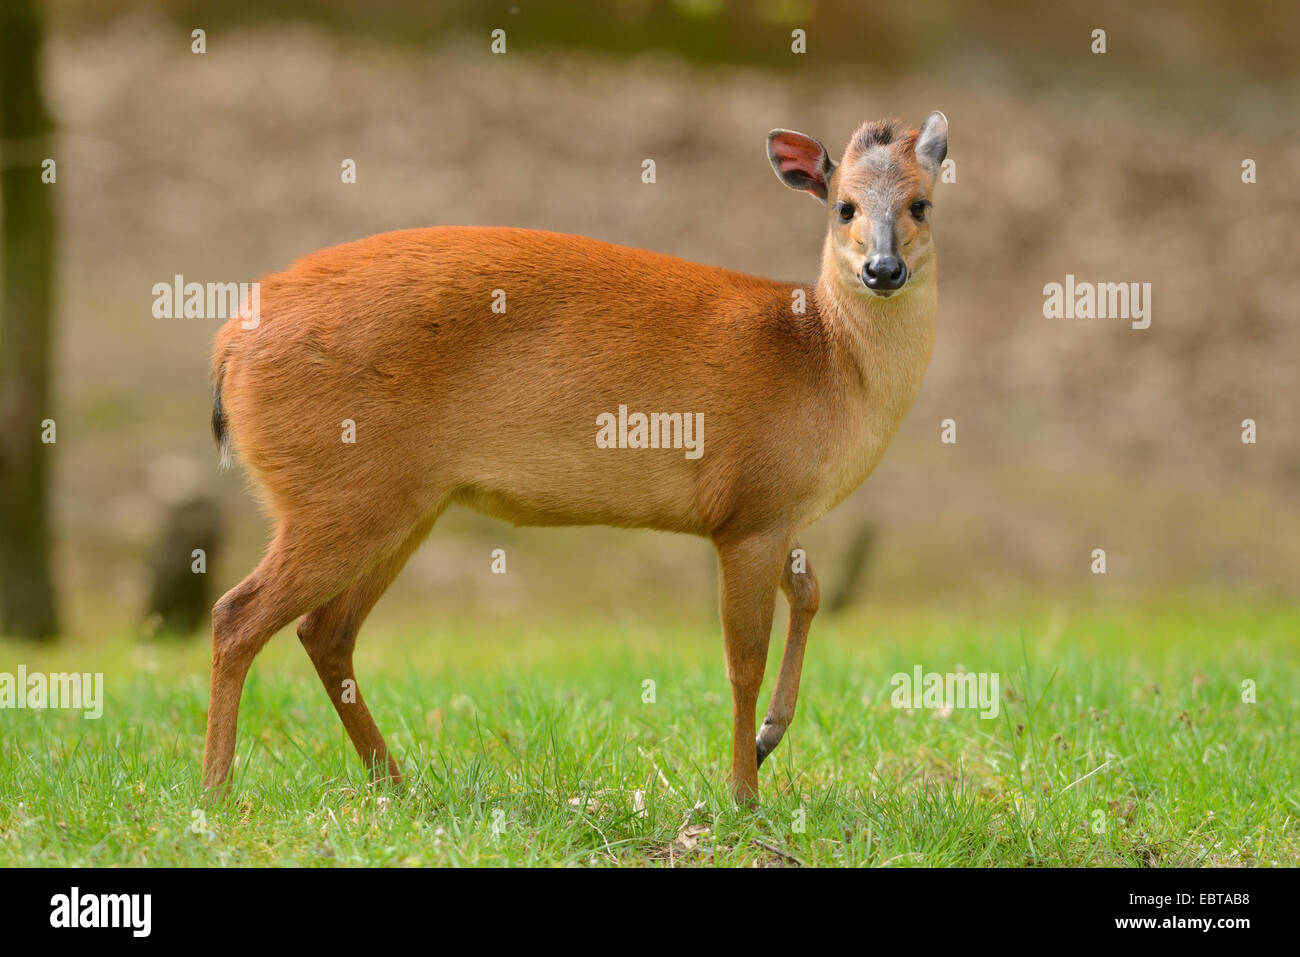 red forest duiker (Cephalophus natalensis), in a meadow Stock Photo